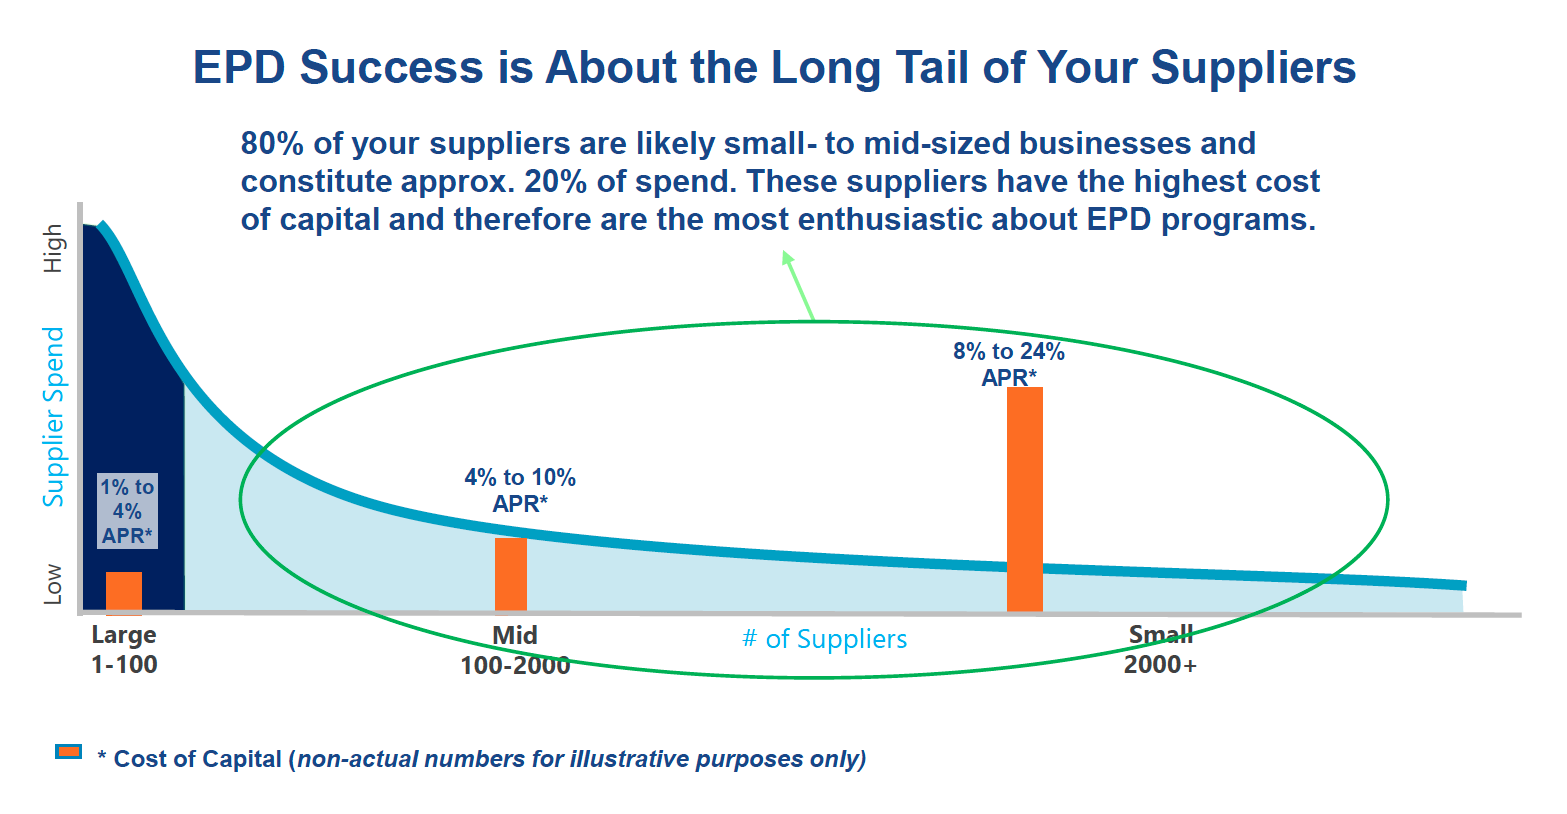 EPD Success is About the Long Tail of Your Suppliers